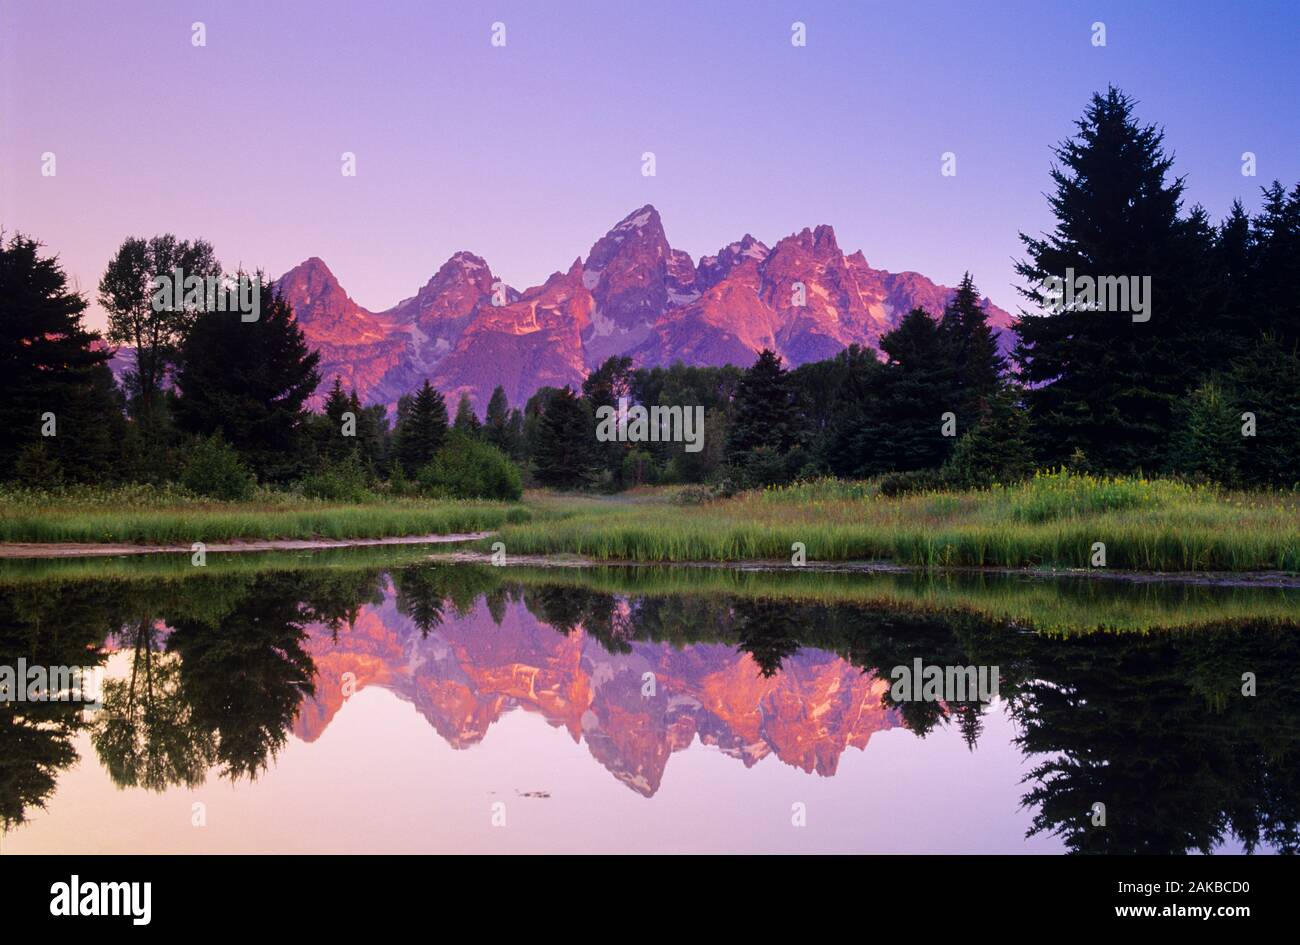 Landscape with lake, trees and mountains under clear sky at sunset, Grand Teton National Park, Wyoming, USA Stock Photo